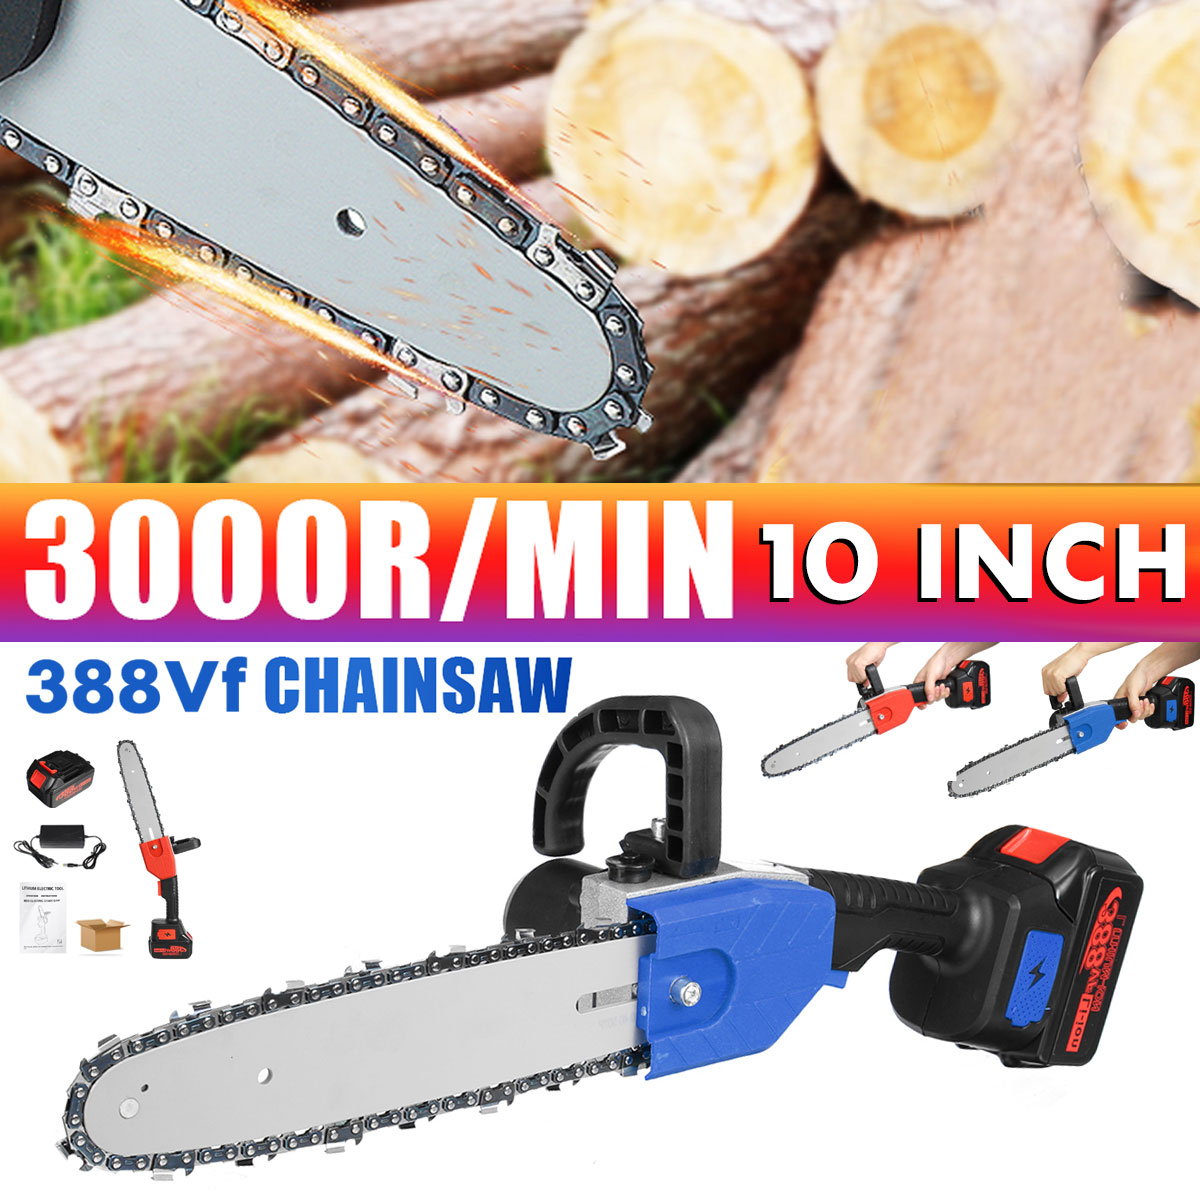 10-Inch-Cordless-Electric-Chain-Saw-One-Hand-Saw-Woodworking-Wood-Cutter-W-12pcs-Battery-Also-Adapte-1851017-1